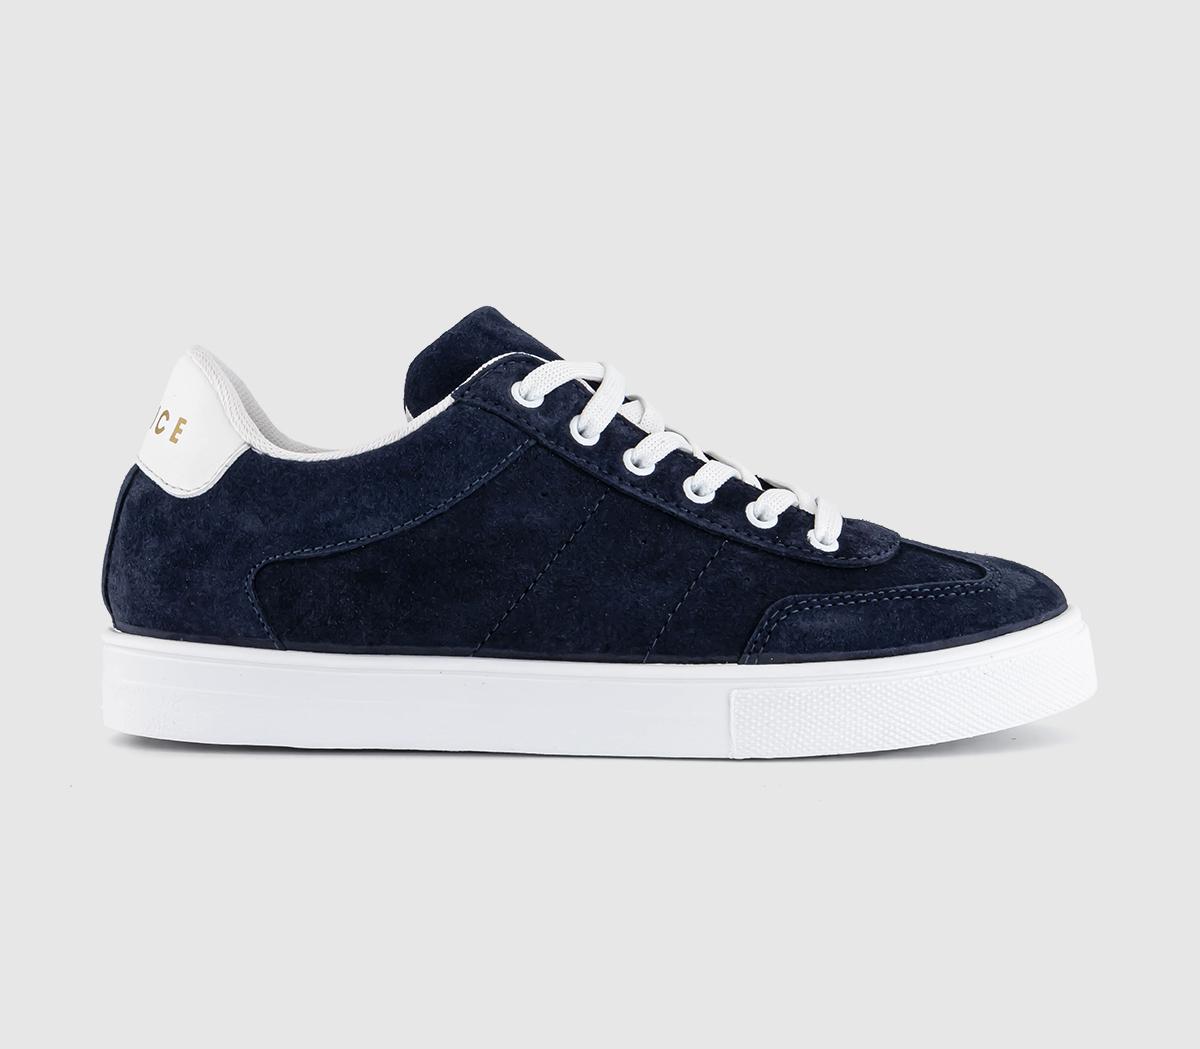 OFFICEFaithful Lace Up TrainersNavy Suede